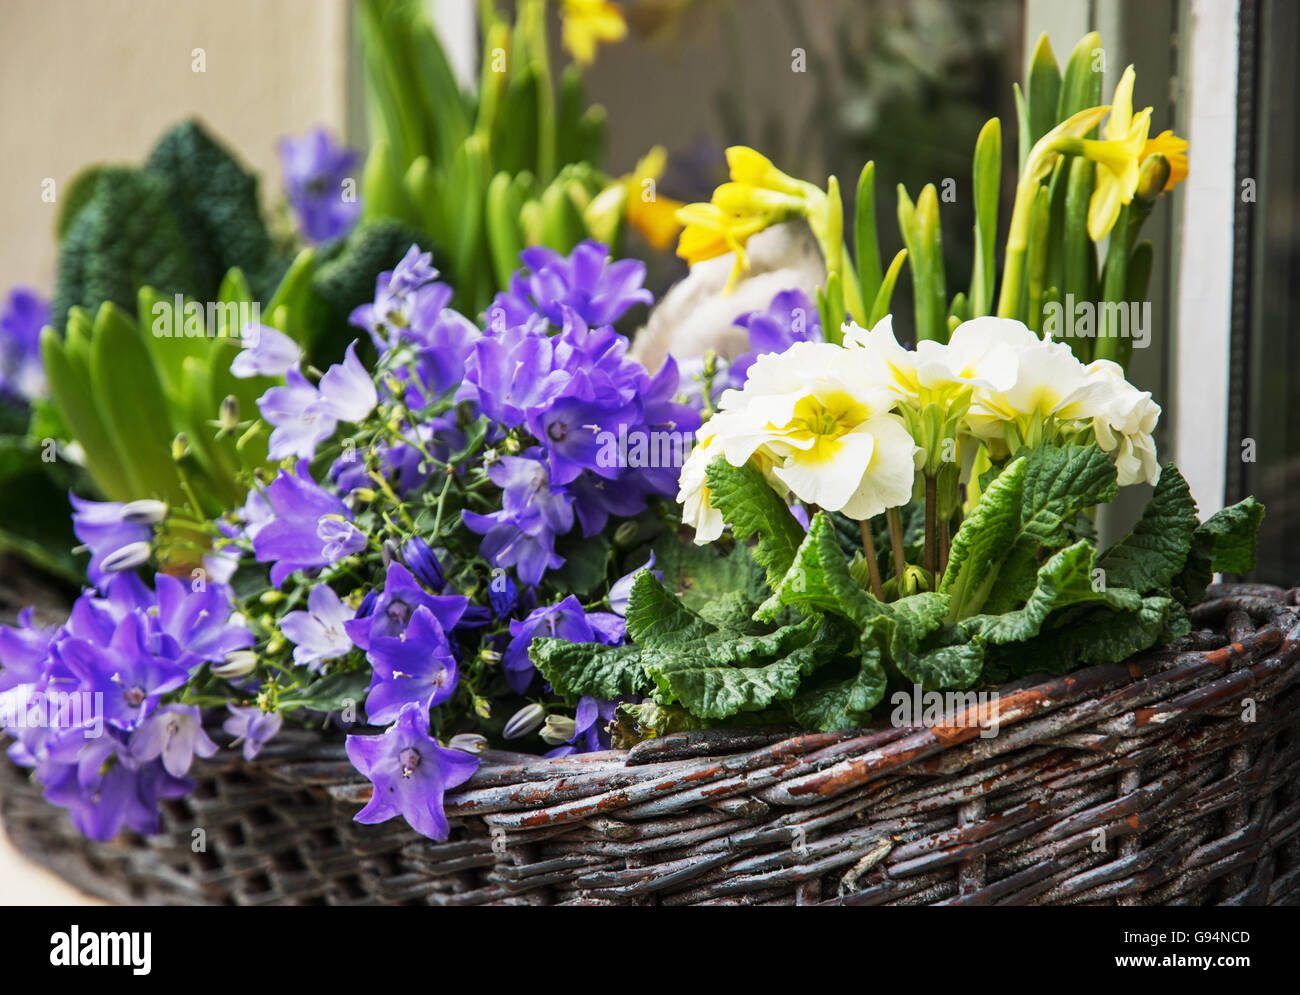 Bluebells and yellow daffodils in the wicker basket. Symbol of springtime. Gardening theme. Natural decoration. Vibrant colors. Stock Photo